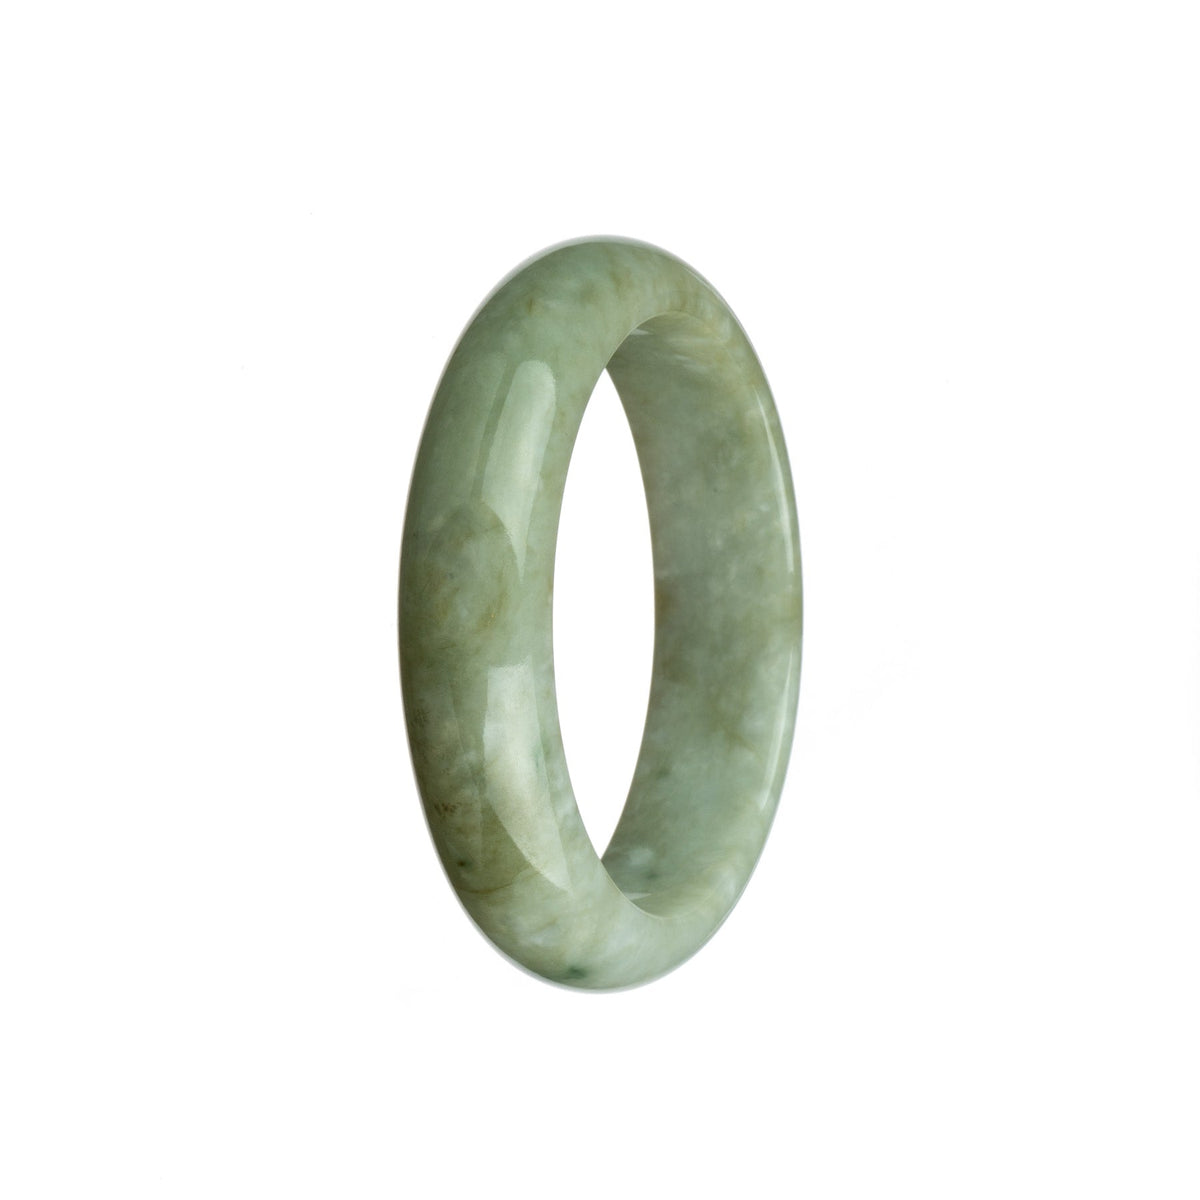 A close-up image of a beautiful jade bangle bracelet with a white and brown pattern. The bracelet is in the shape of a half-moon and has a traditional design. It measures 55mm in diameter.